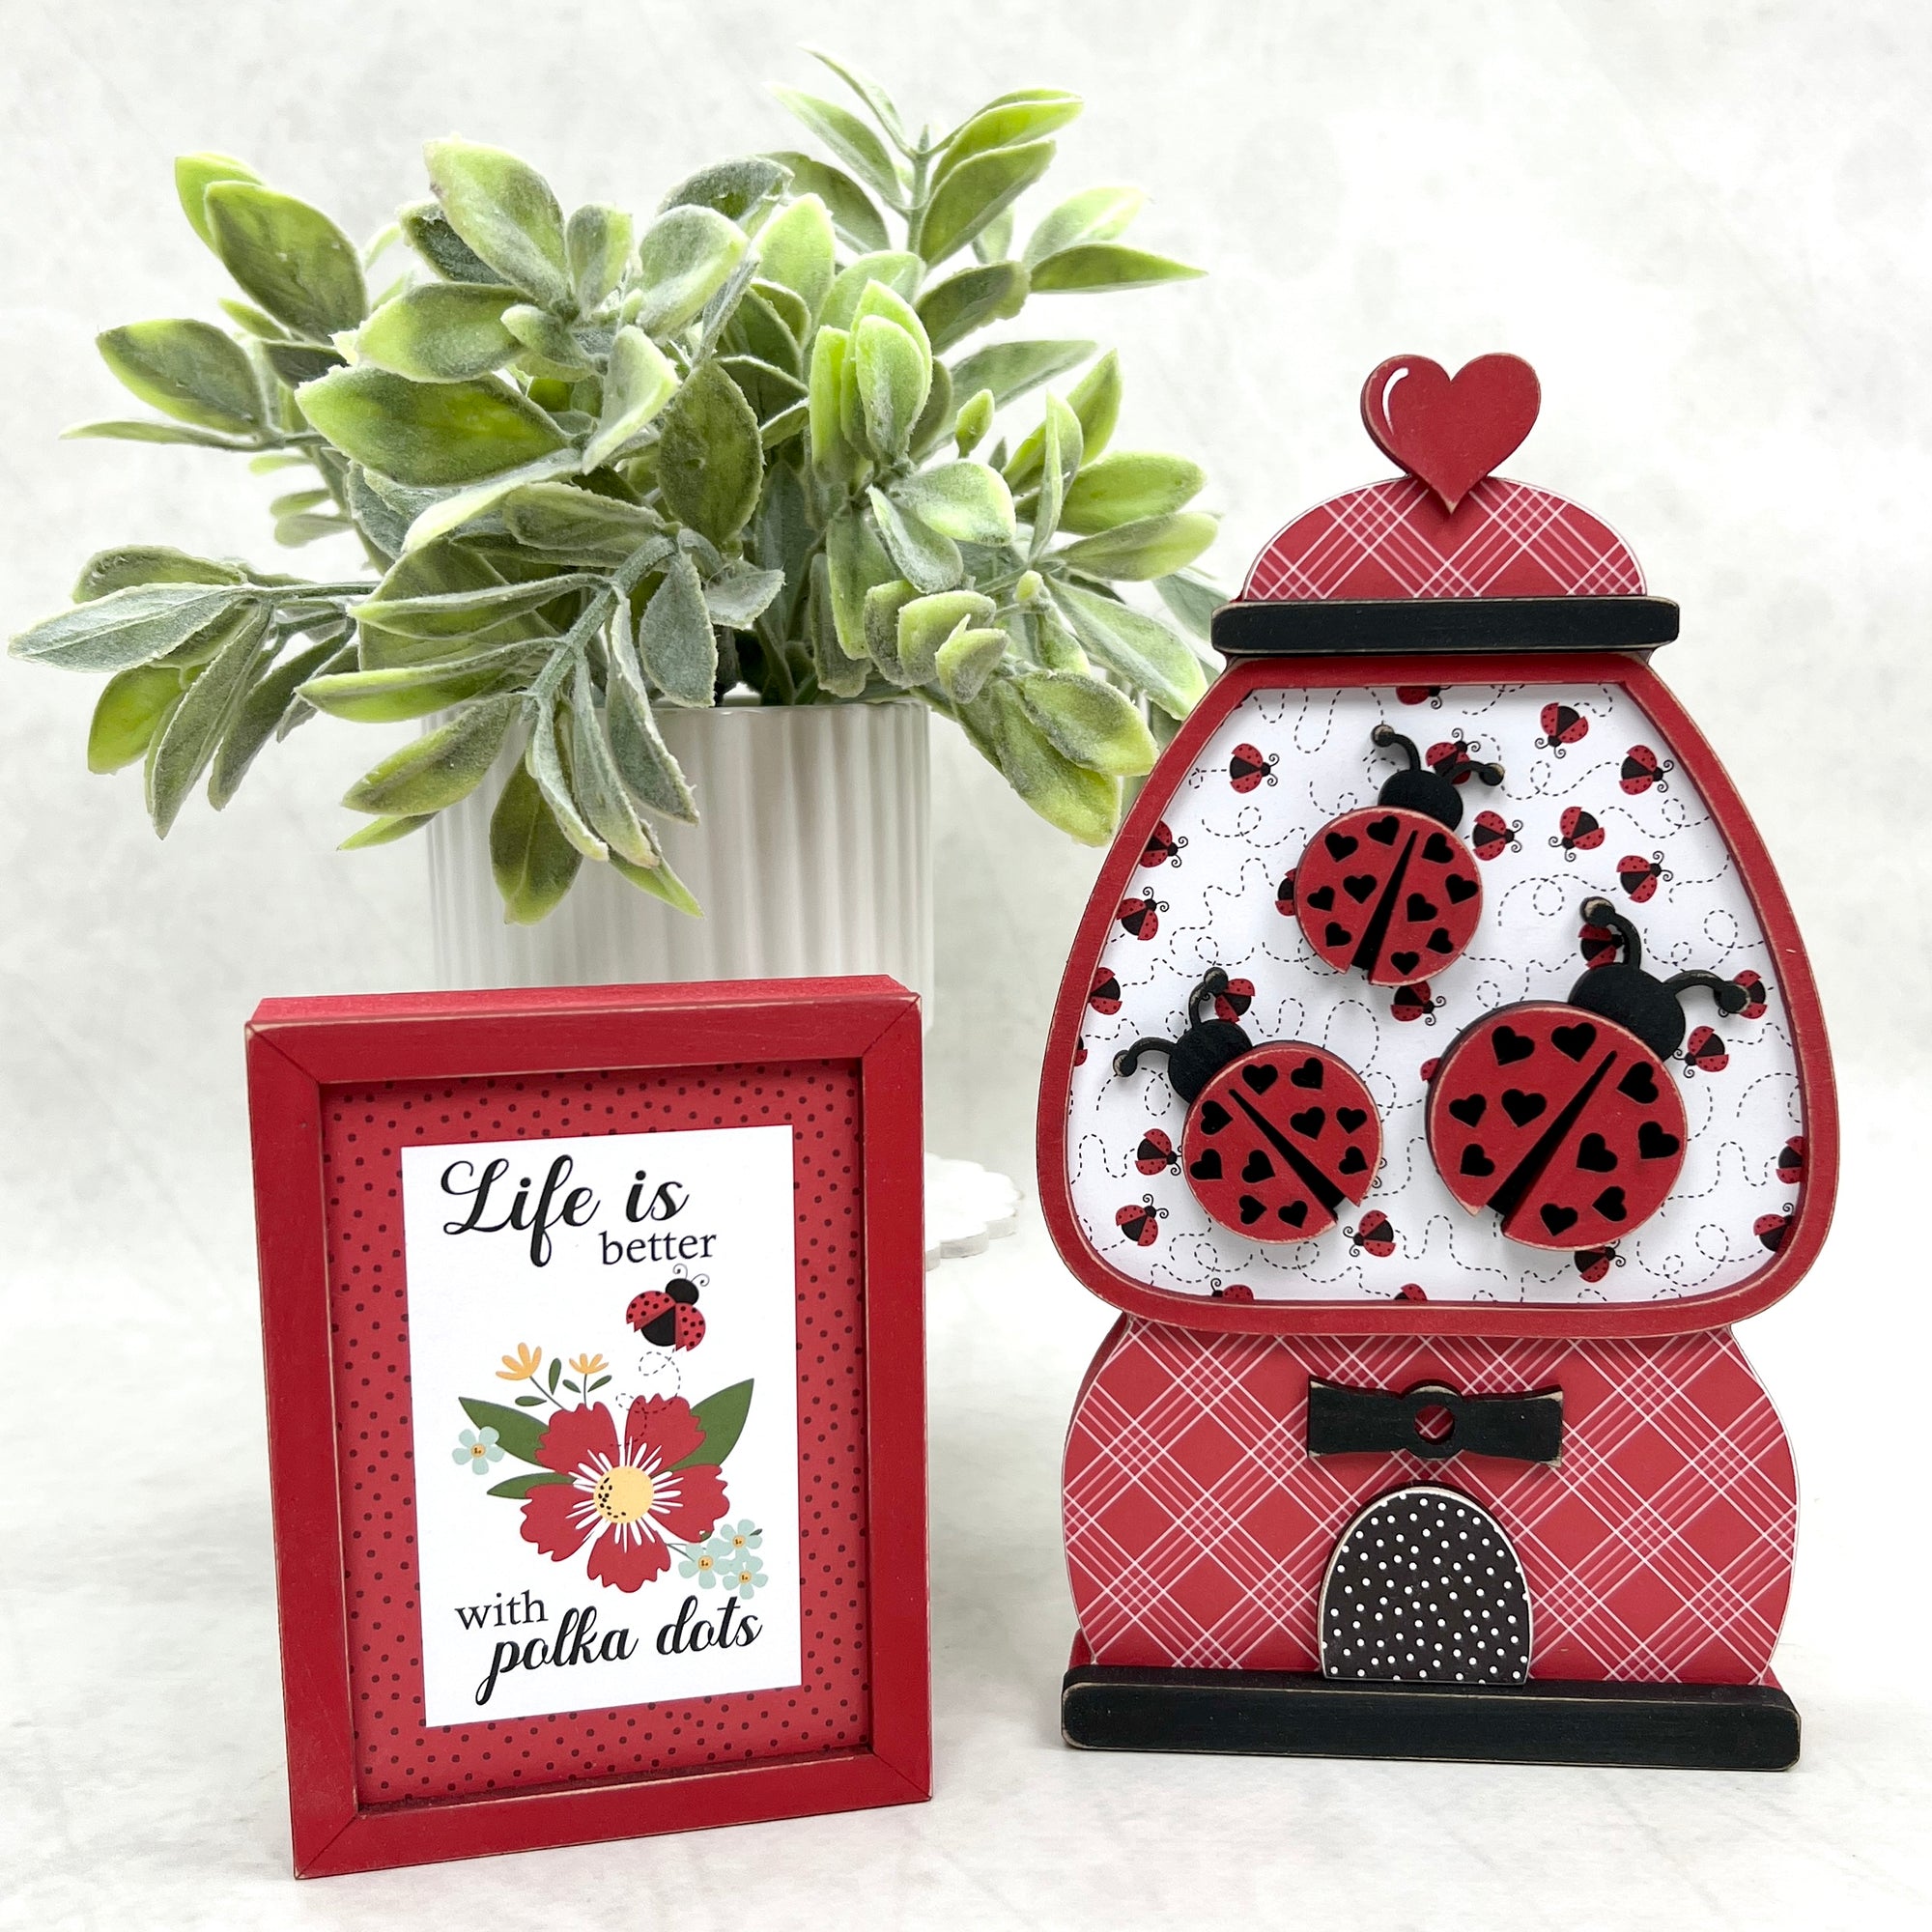 Red gumball machine with ladybugs inside with a block sign that says life is better with polka dots. DIY wood decor craft kit